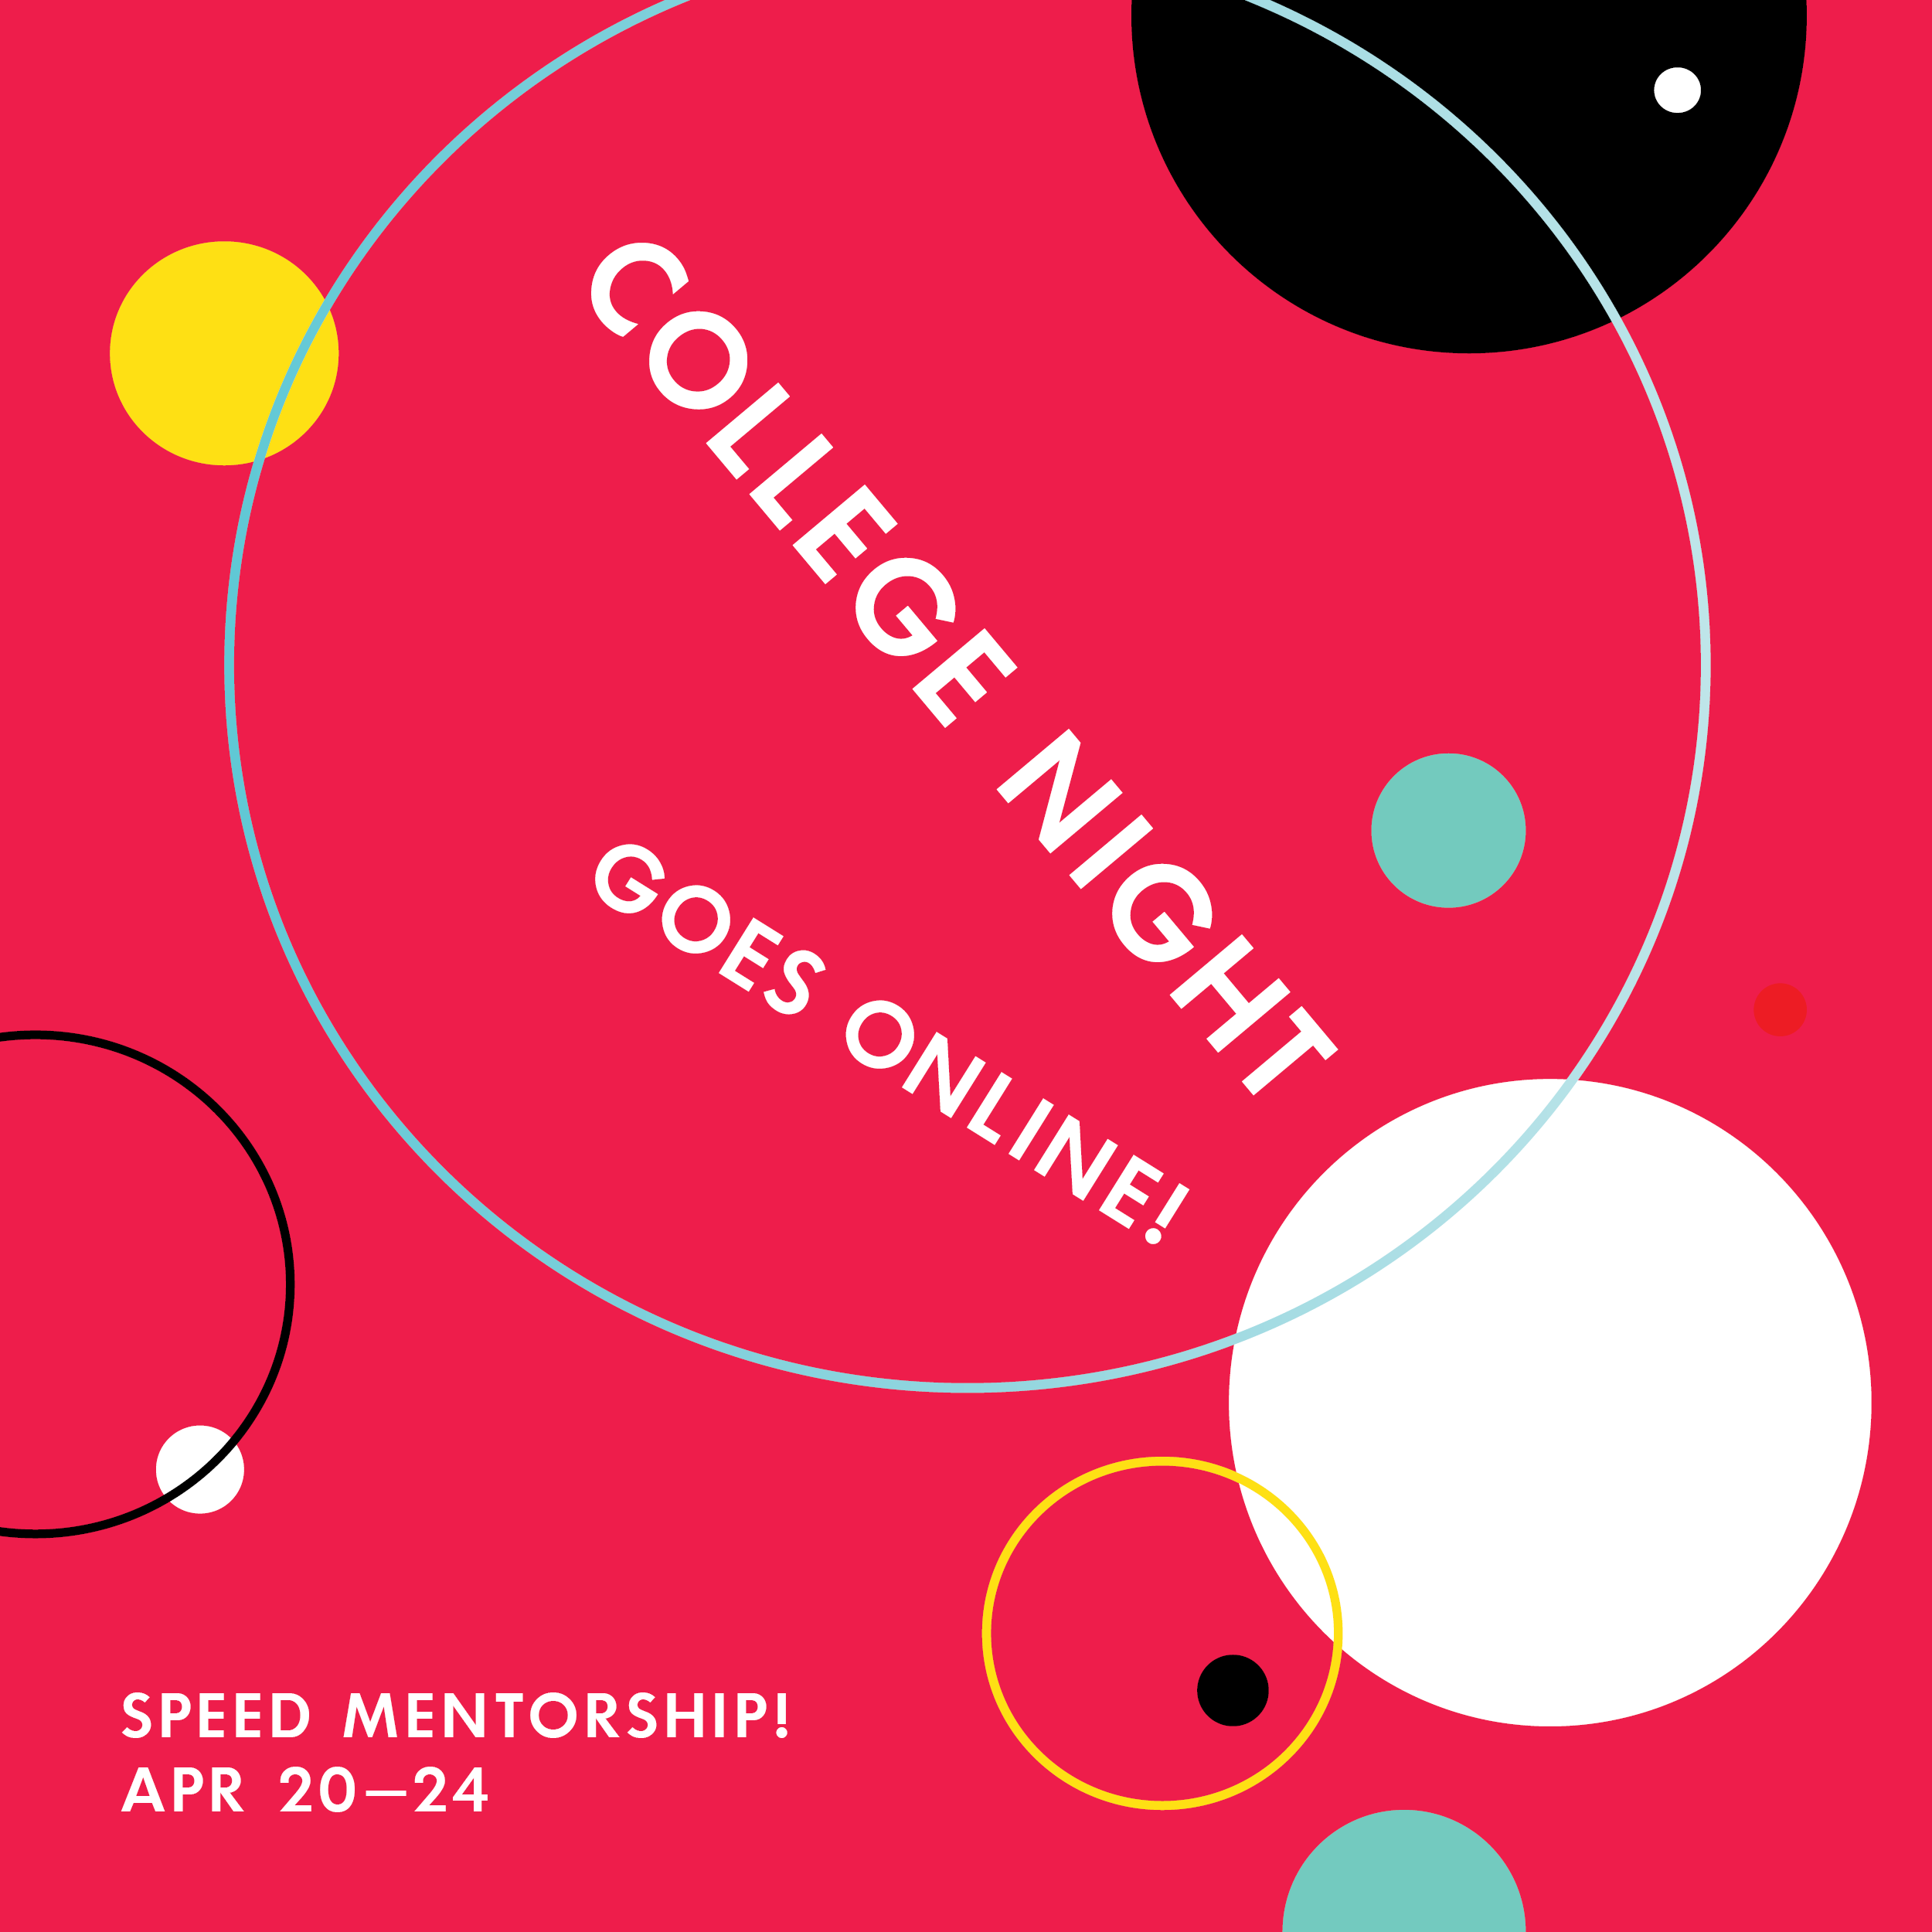 A red text graphic with scattered brightly colored circles promoting a College Night event.